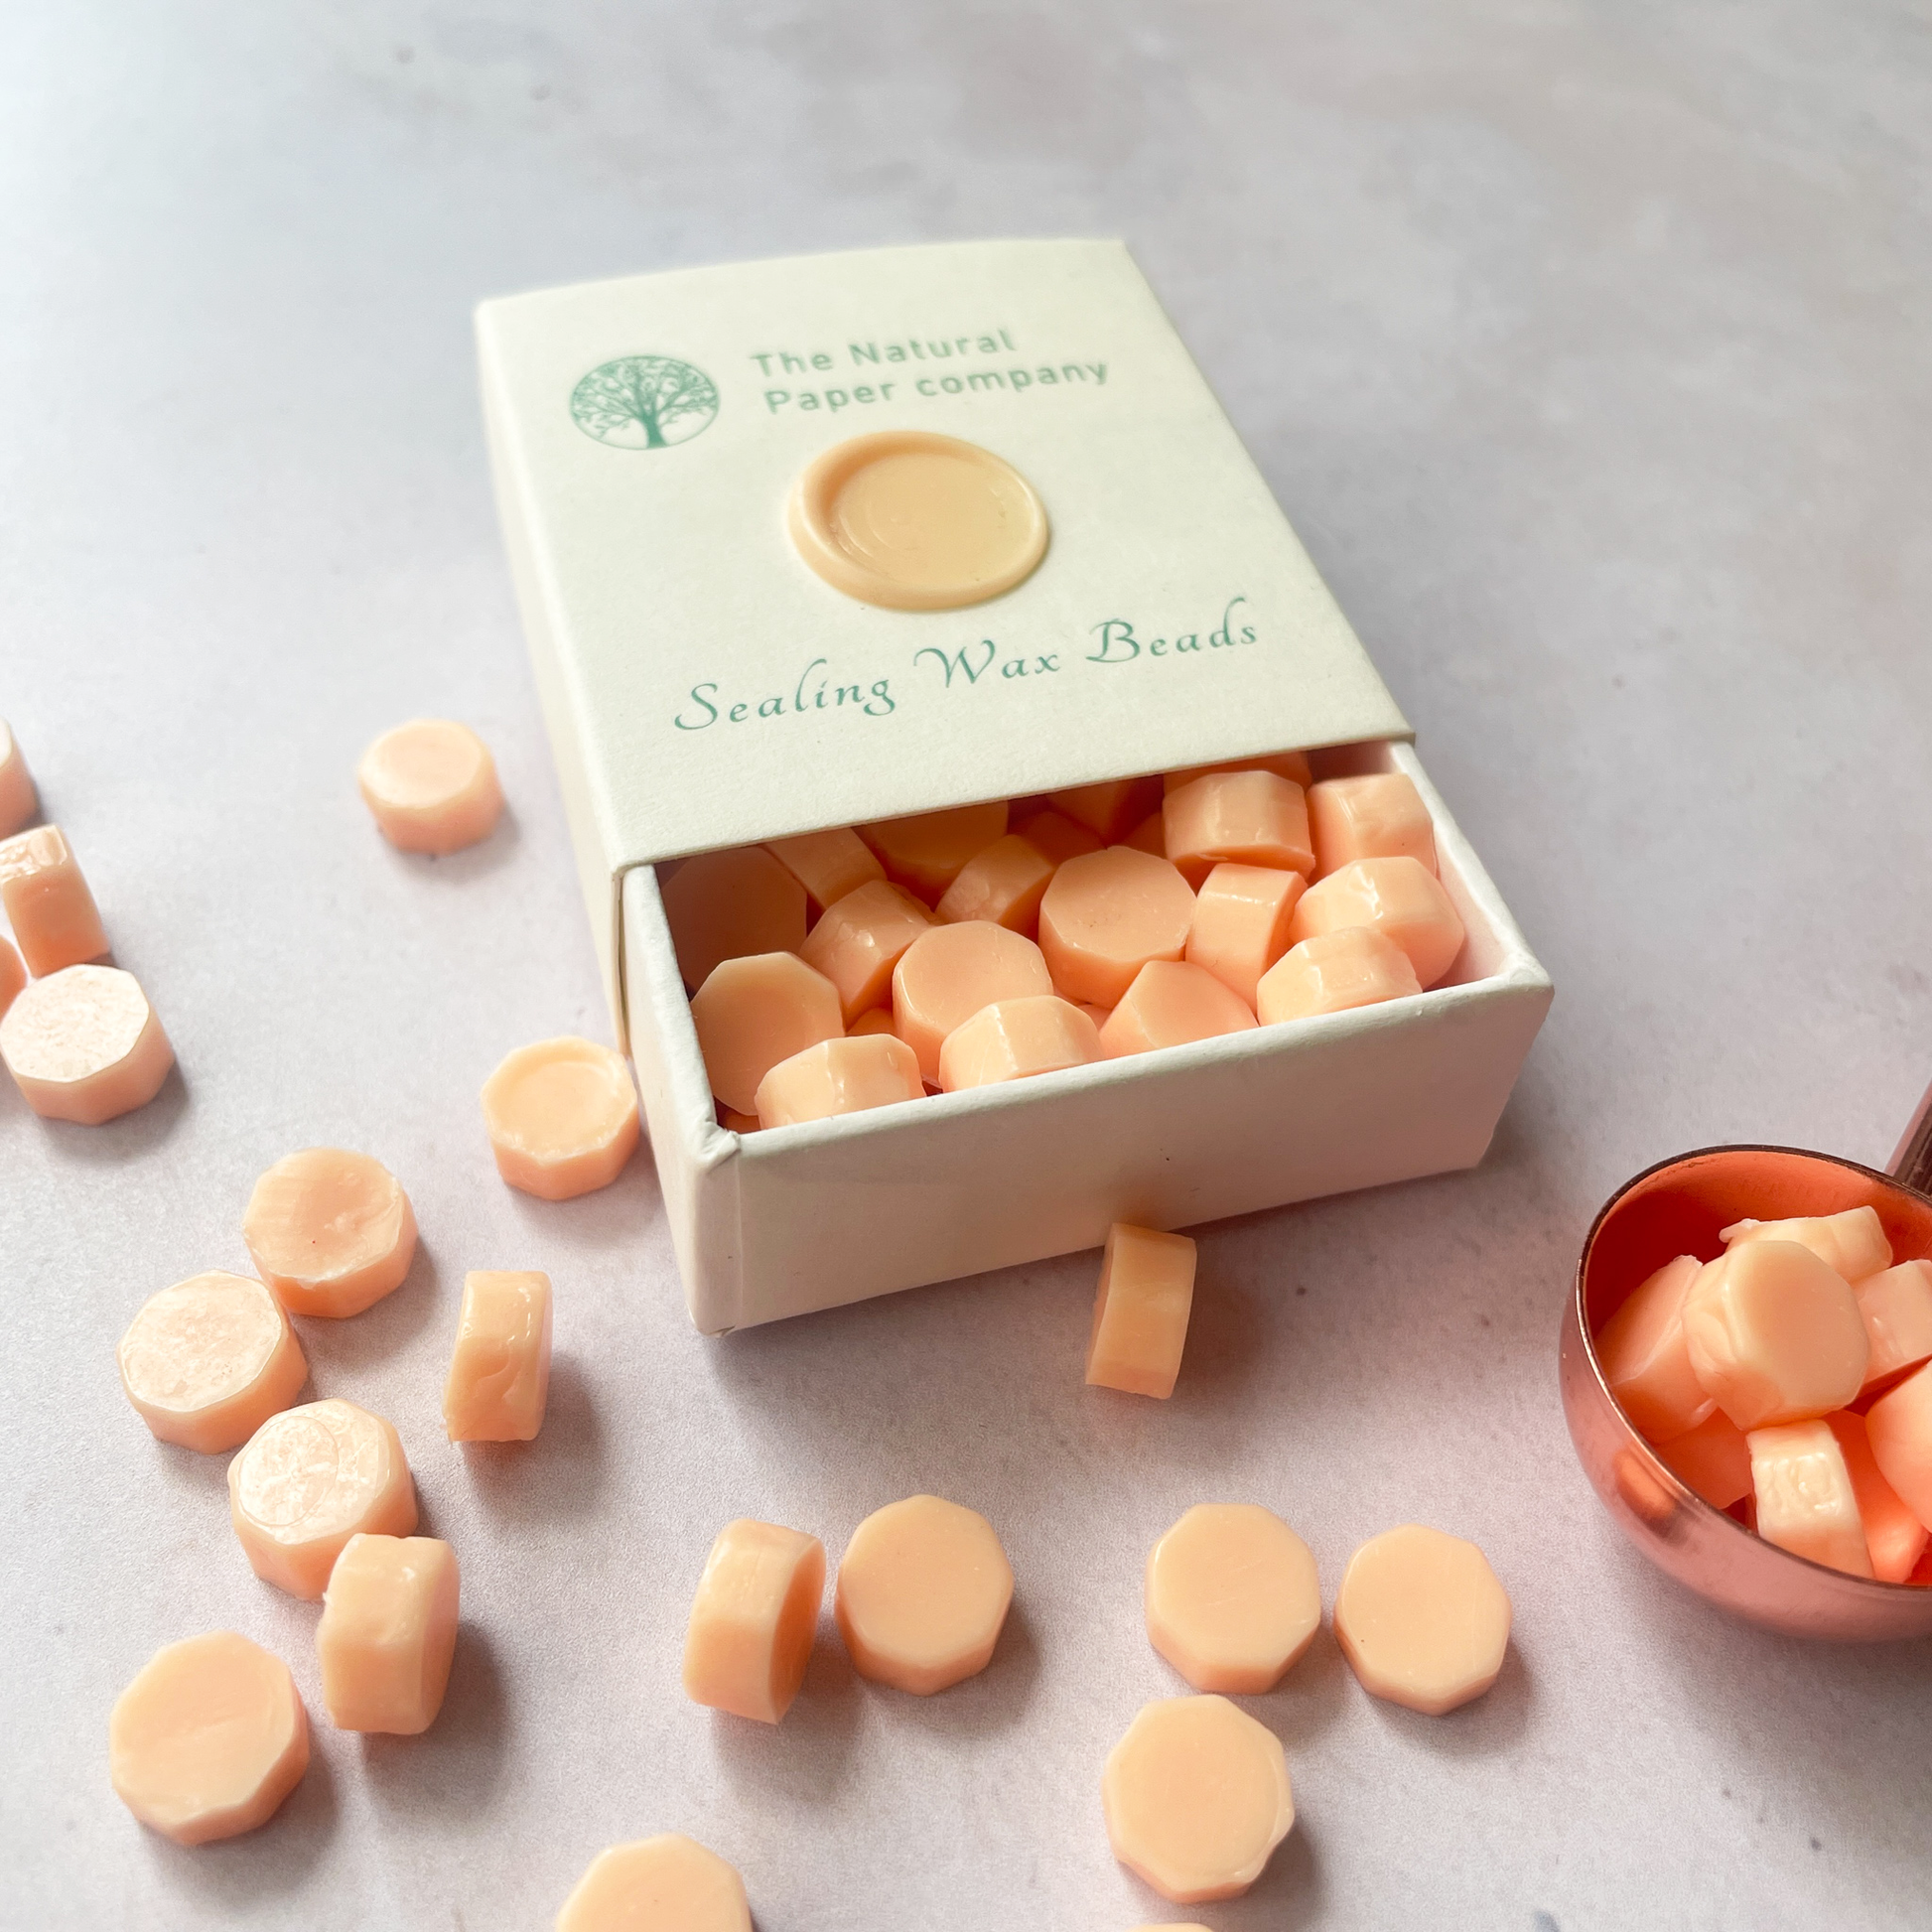 box of sealing wax beads in peach.  Make wax seals with eco friendly wax